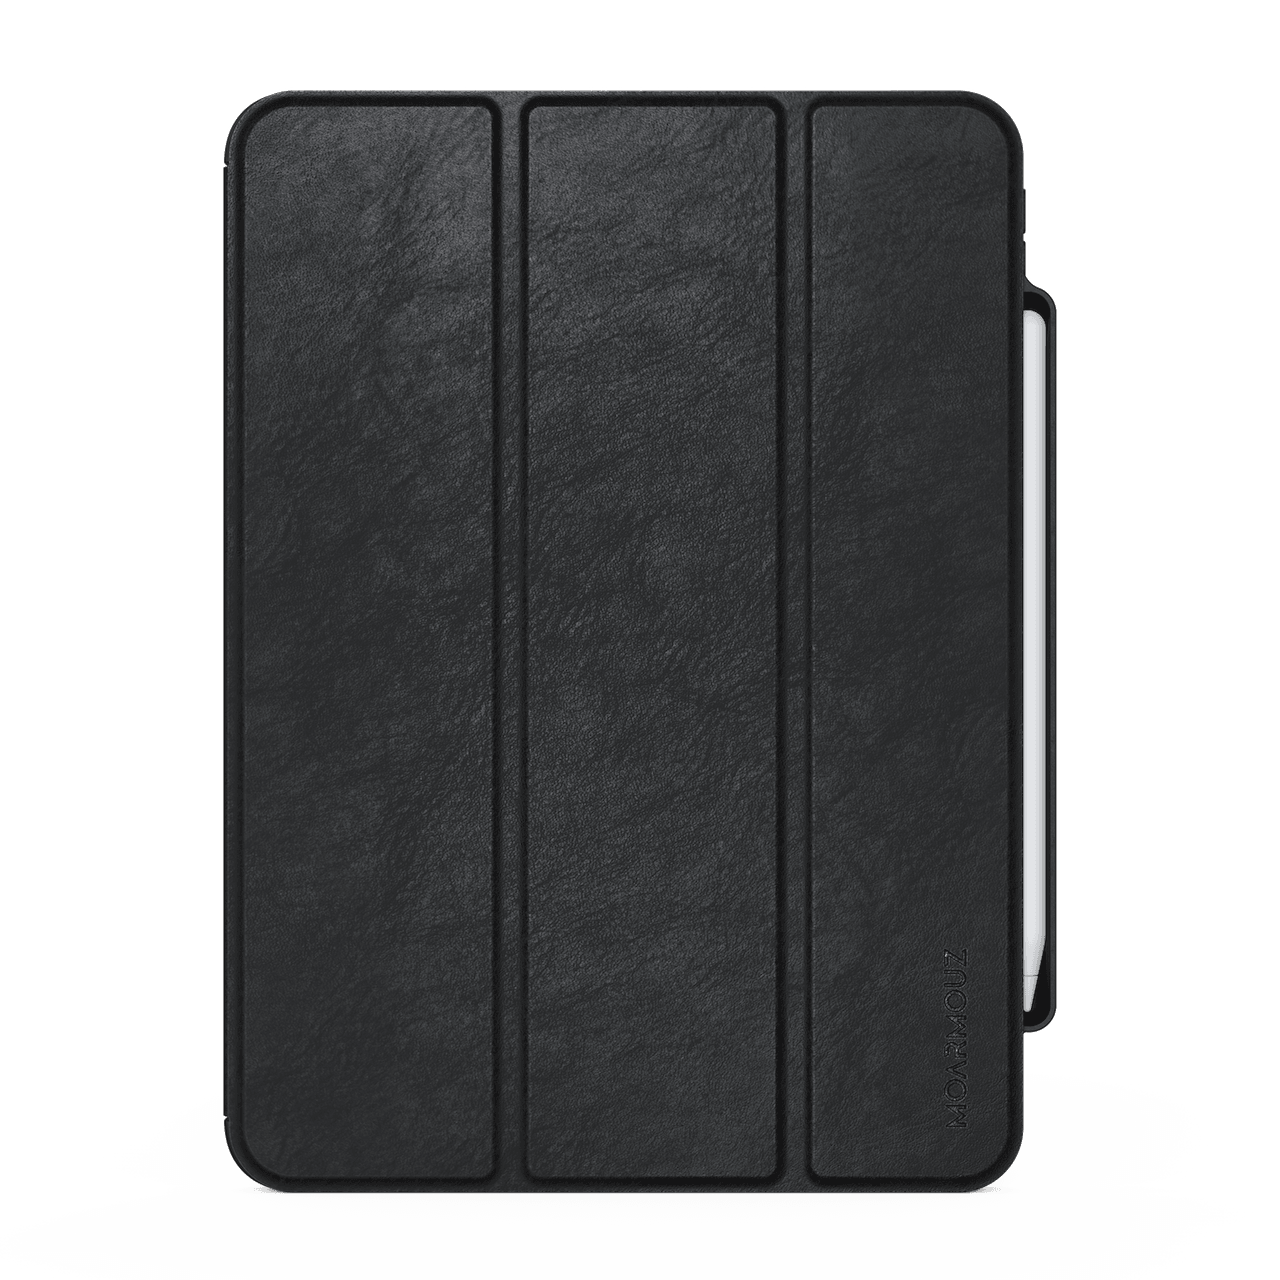 MoArmouz - Folio Smart Cover for iPad Air (5th Gen/4th Gen), 10.9" [Apple Pencil Pair & Charge Supported]